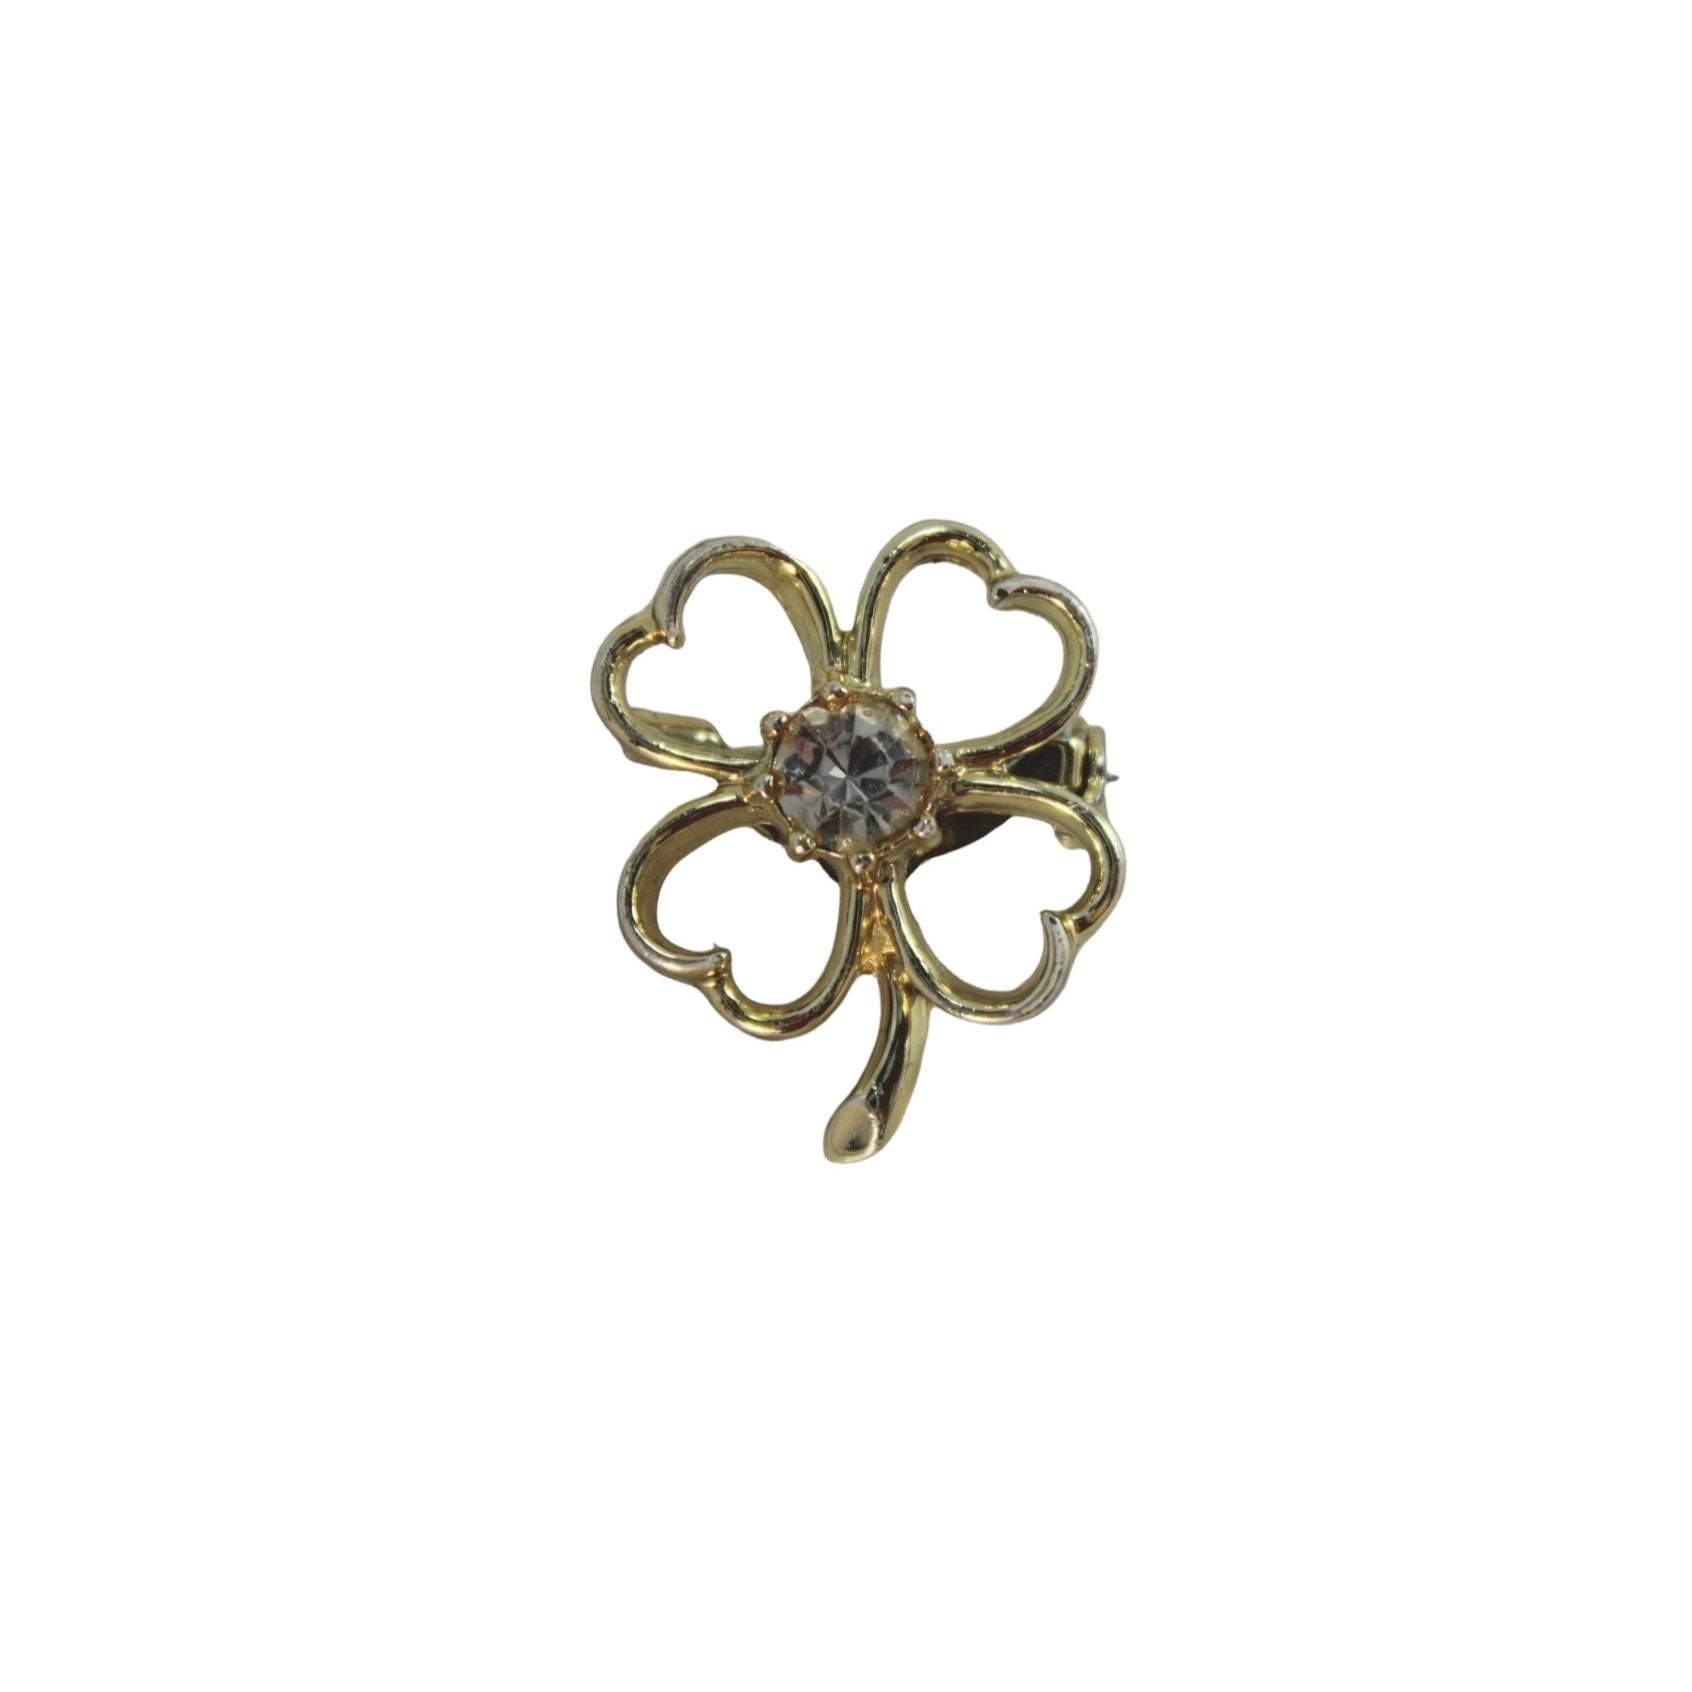 Chanel Four Leaf Clover Brooch - Gold-Tone Metal Pin, Brooches - CHA192112